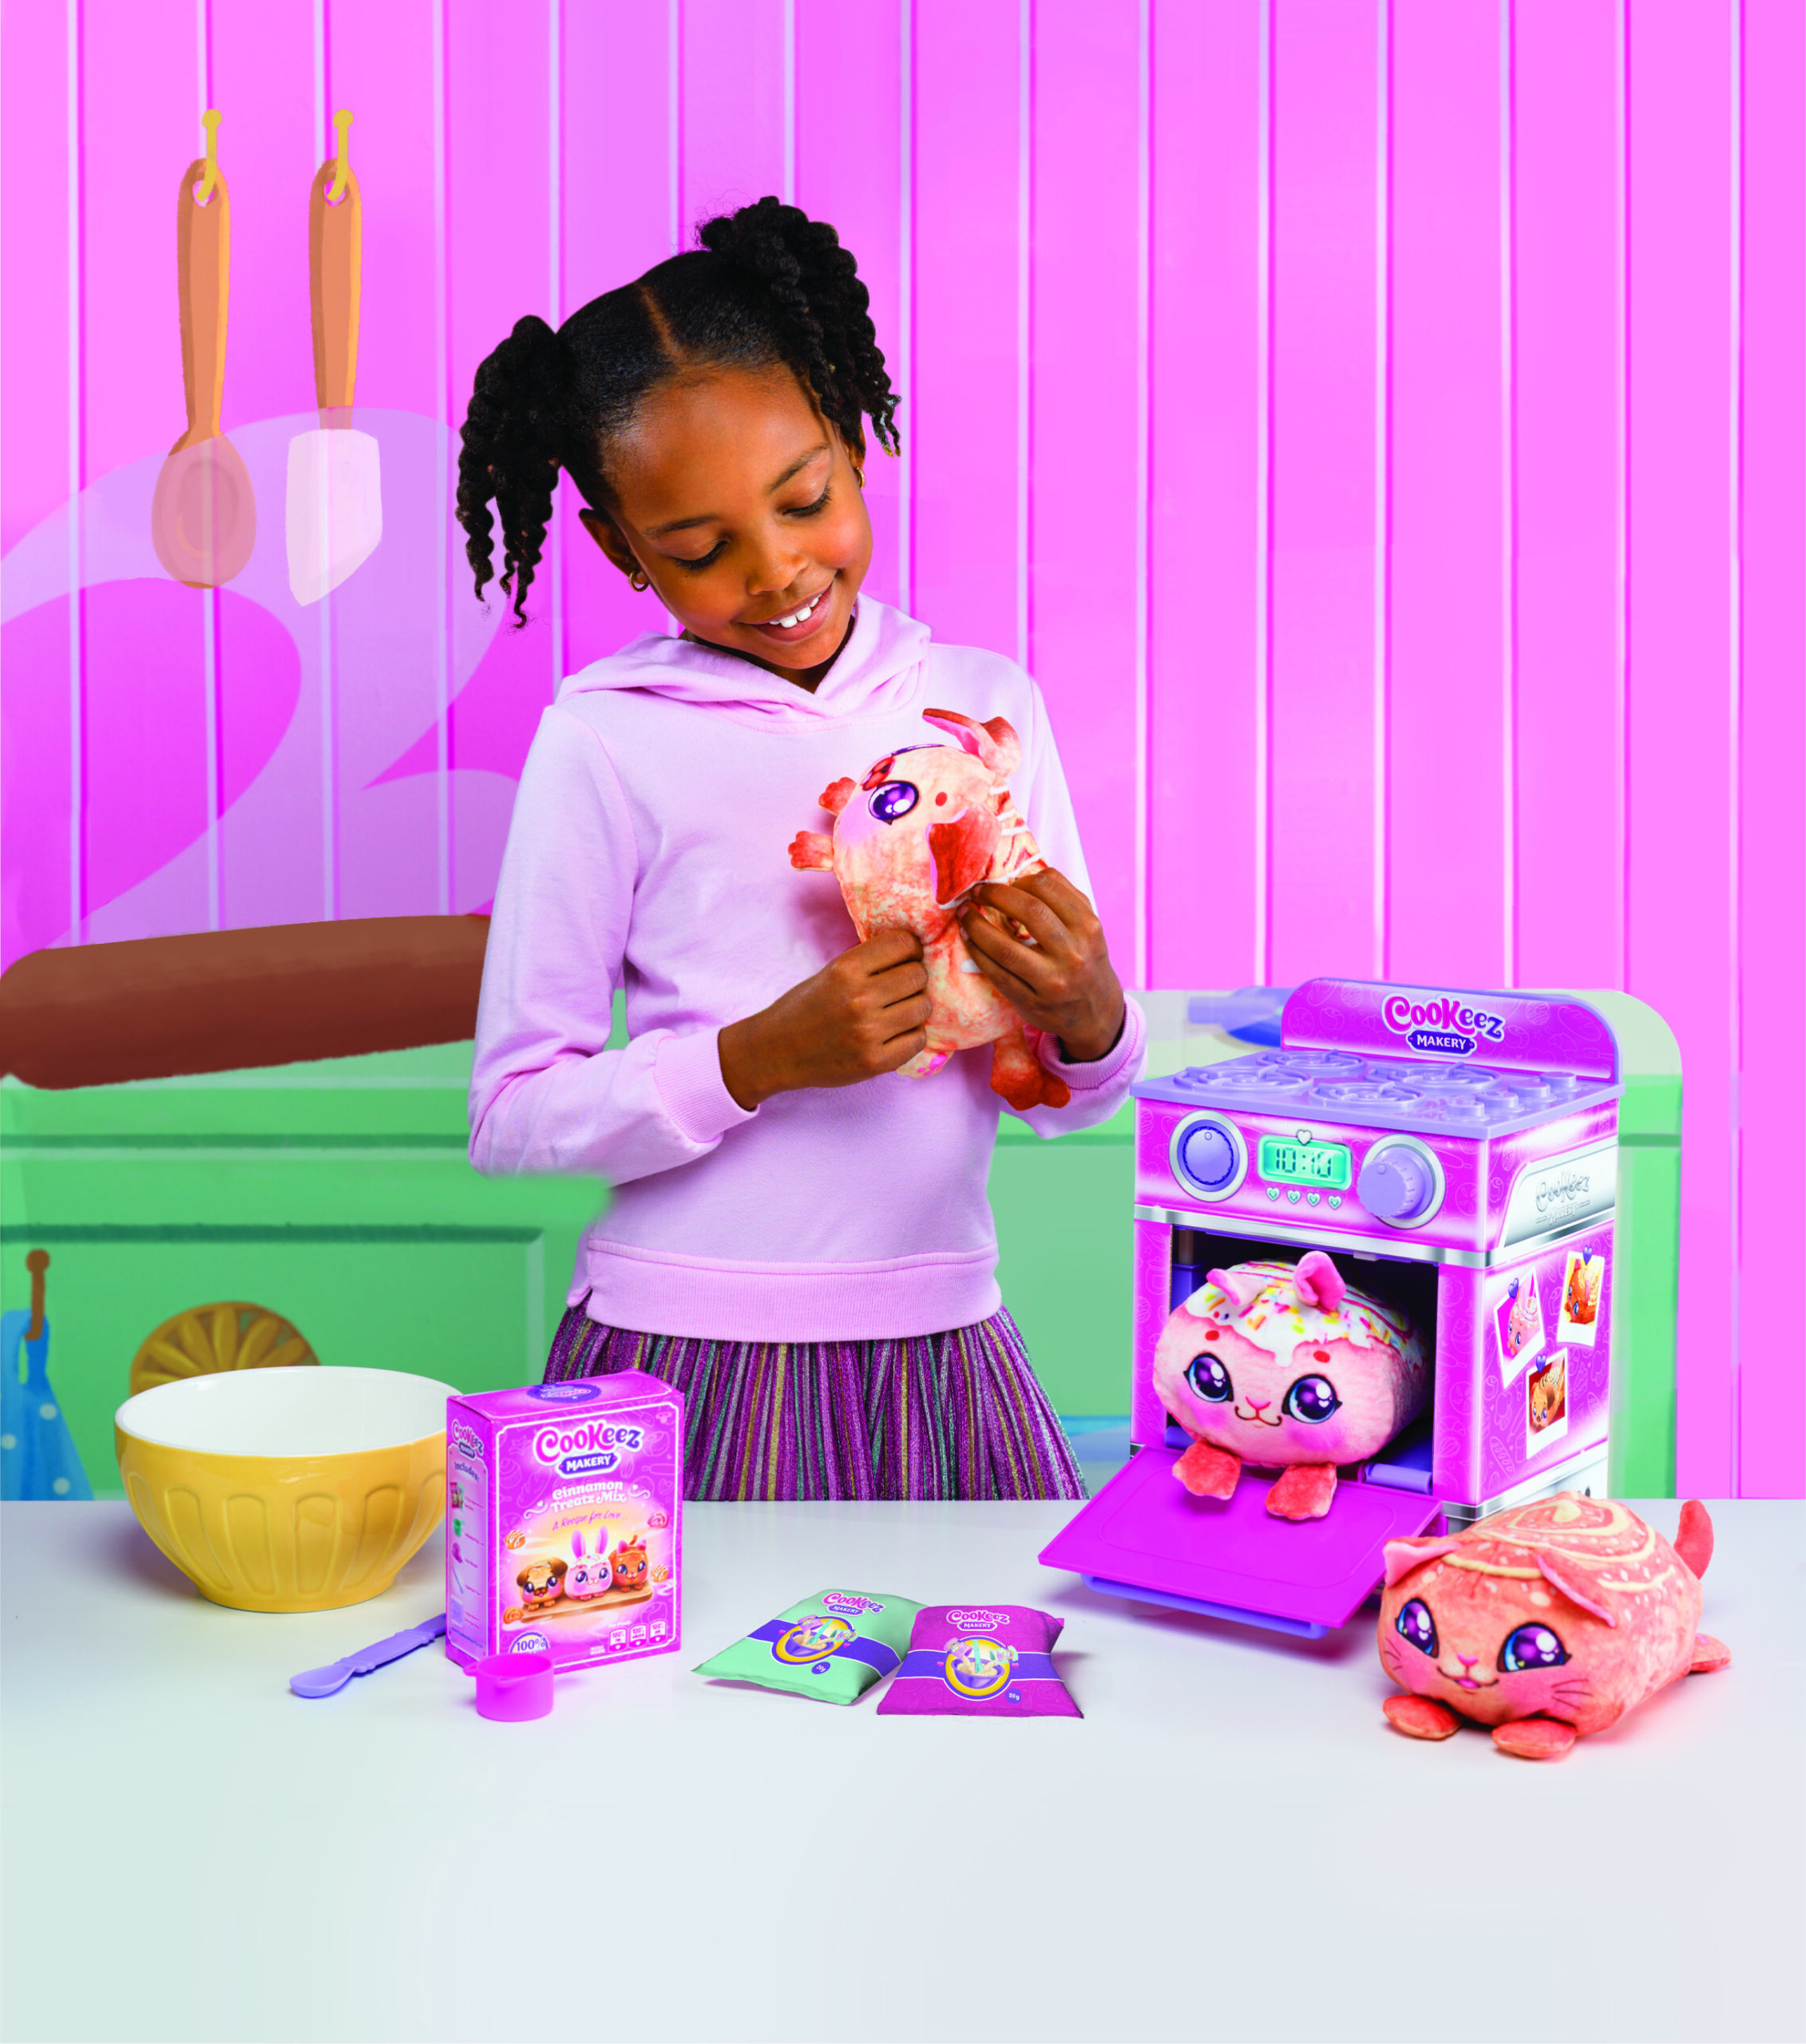 Moose Toys announces two new innovative plush products -Toy World Magazine